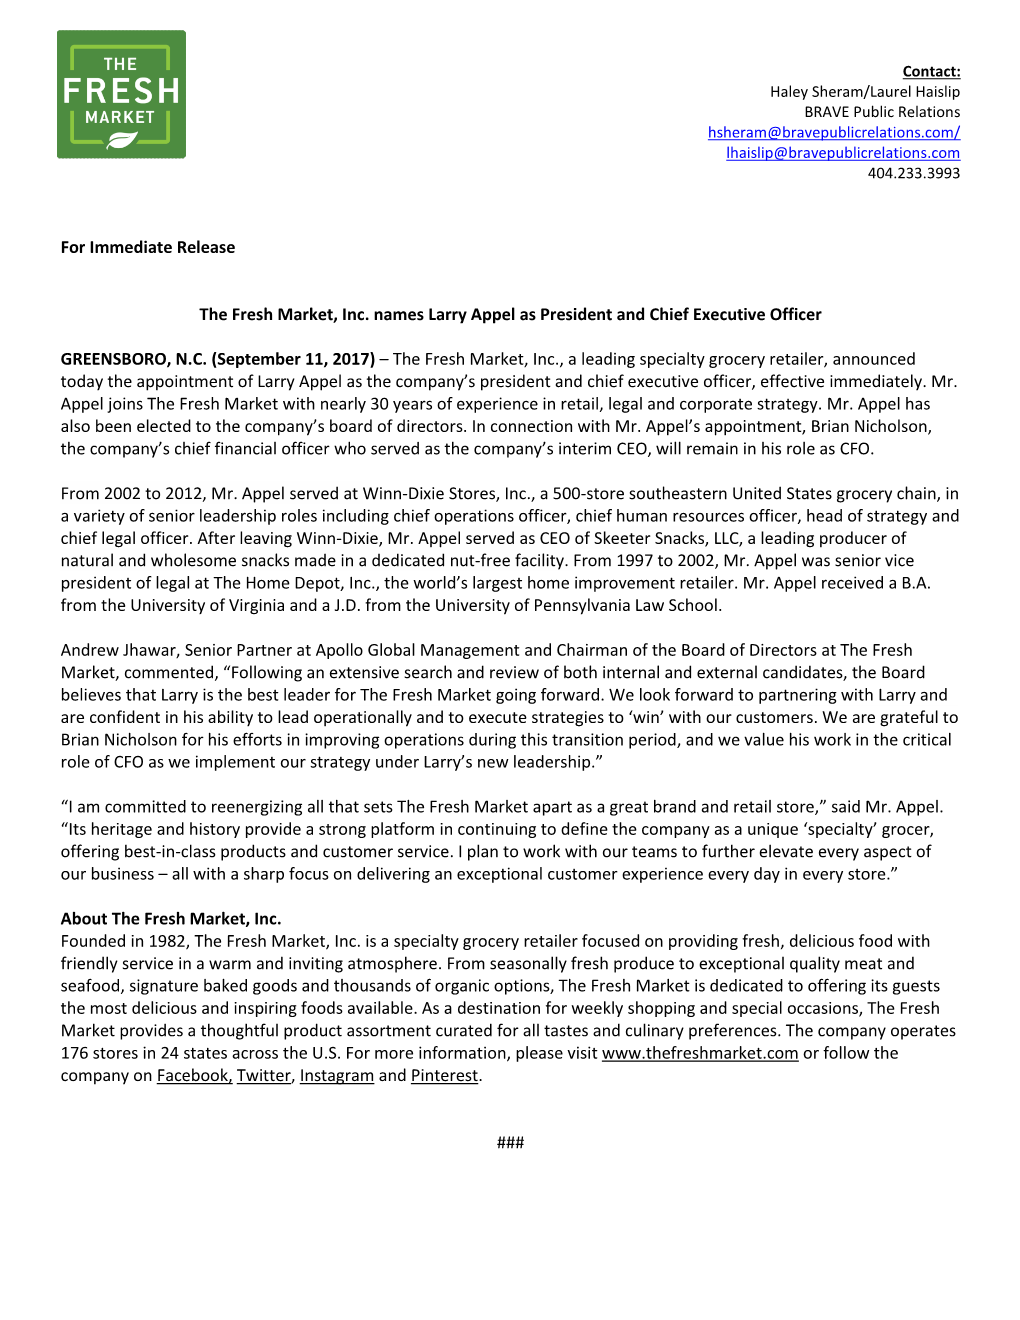 For Immediate Release the Fresh Market, Inc. Names Larry Appel As